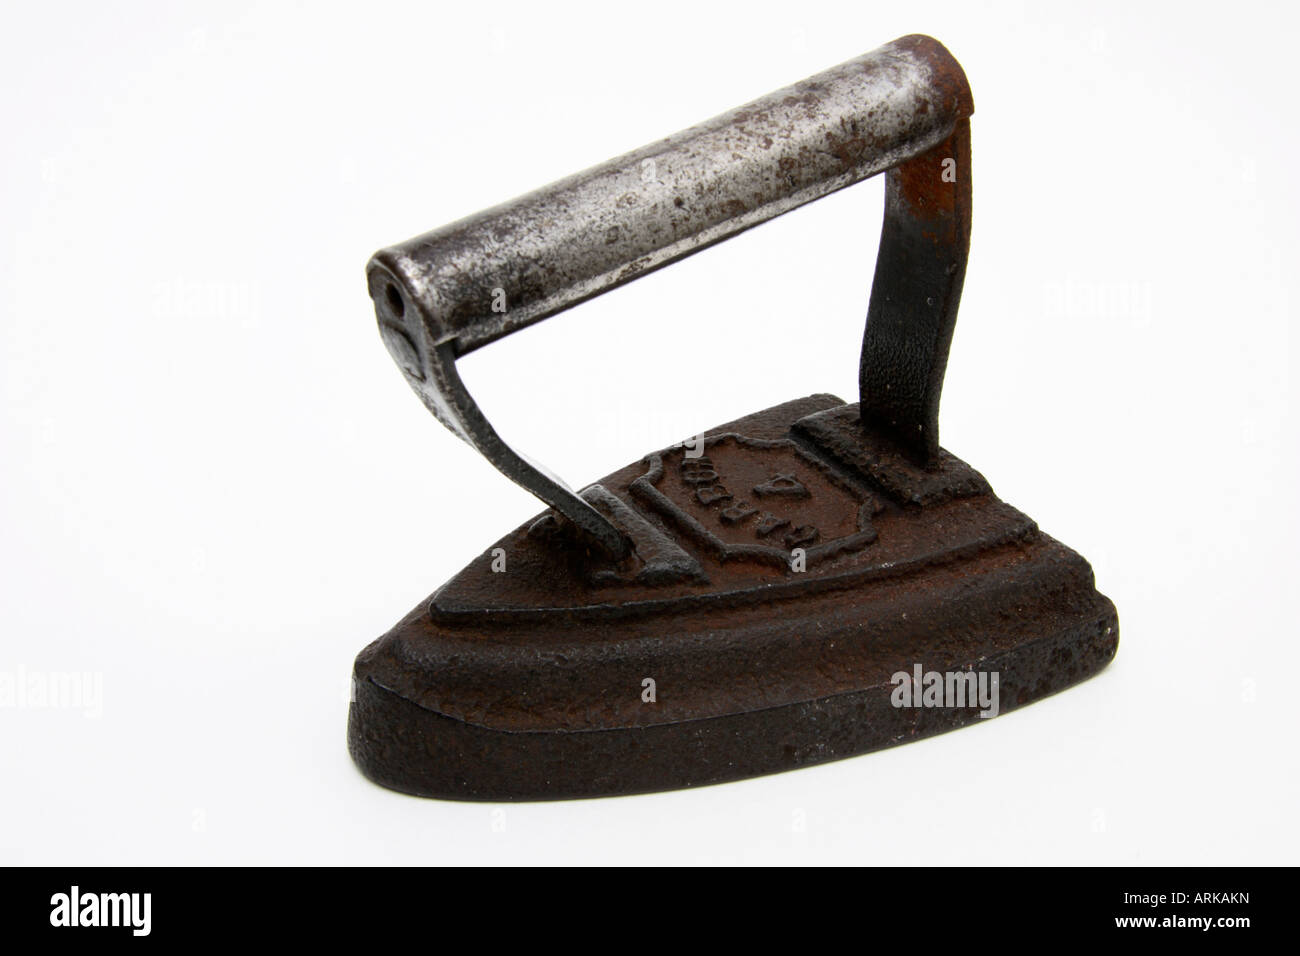 An old Victorian antique domestic smoothing iron. Stock Photo